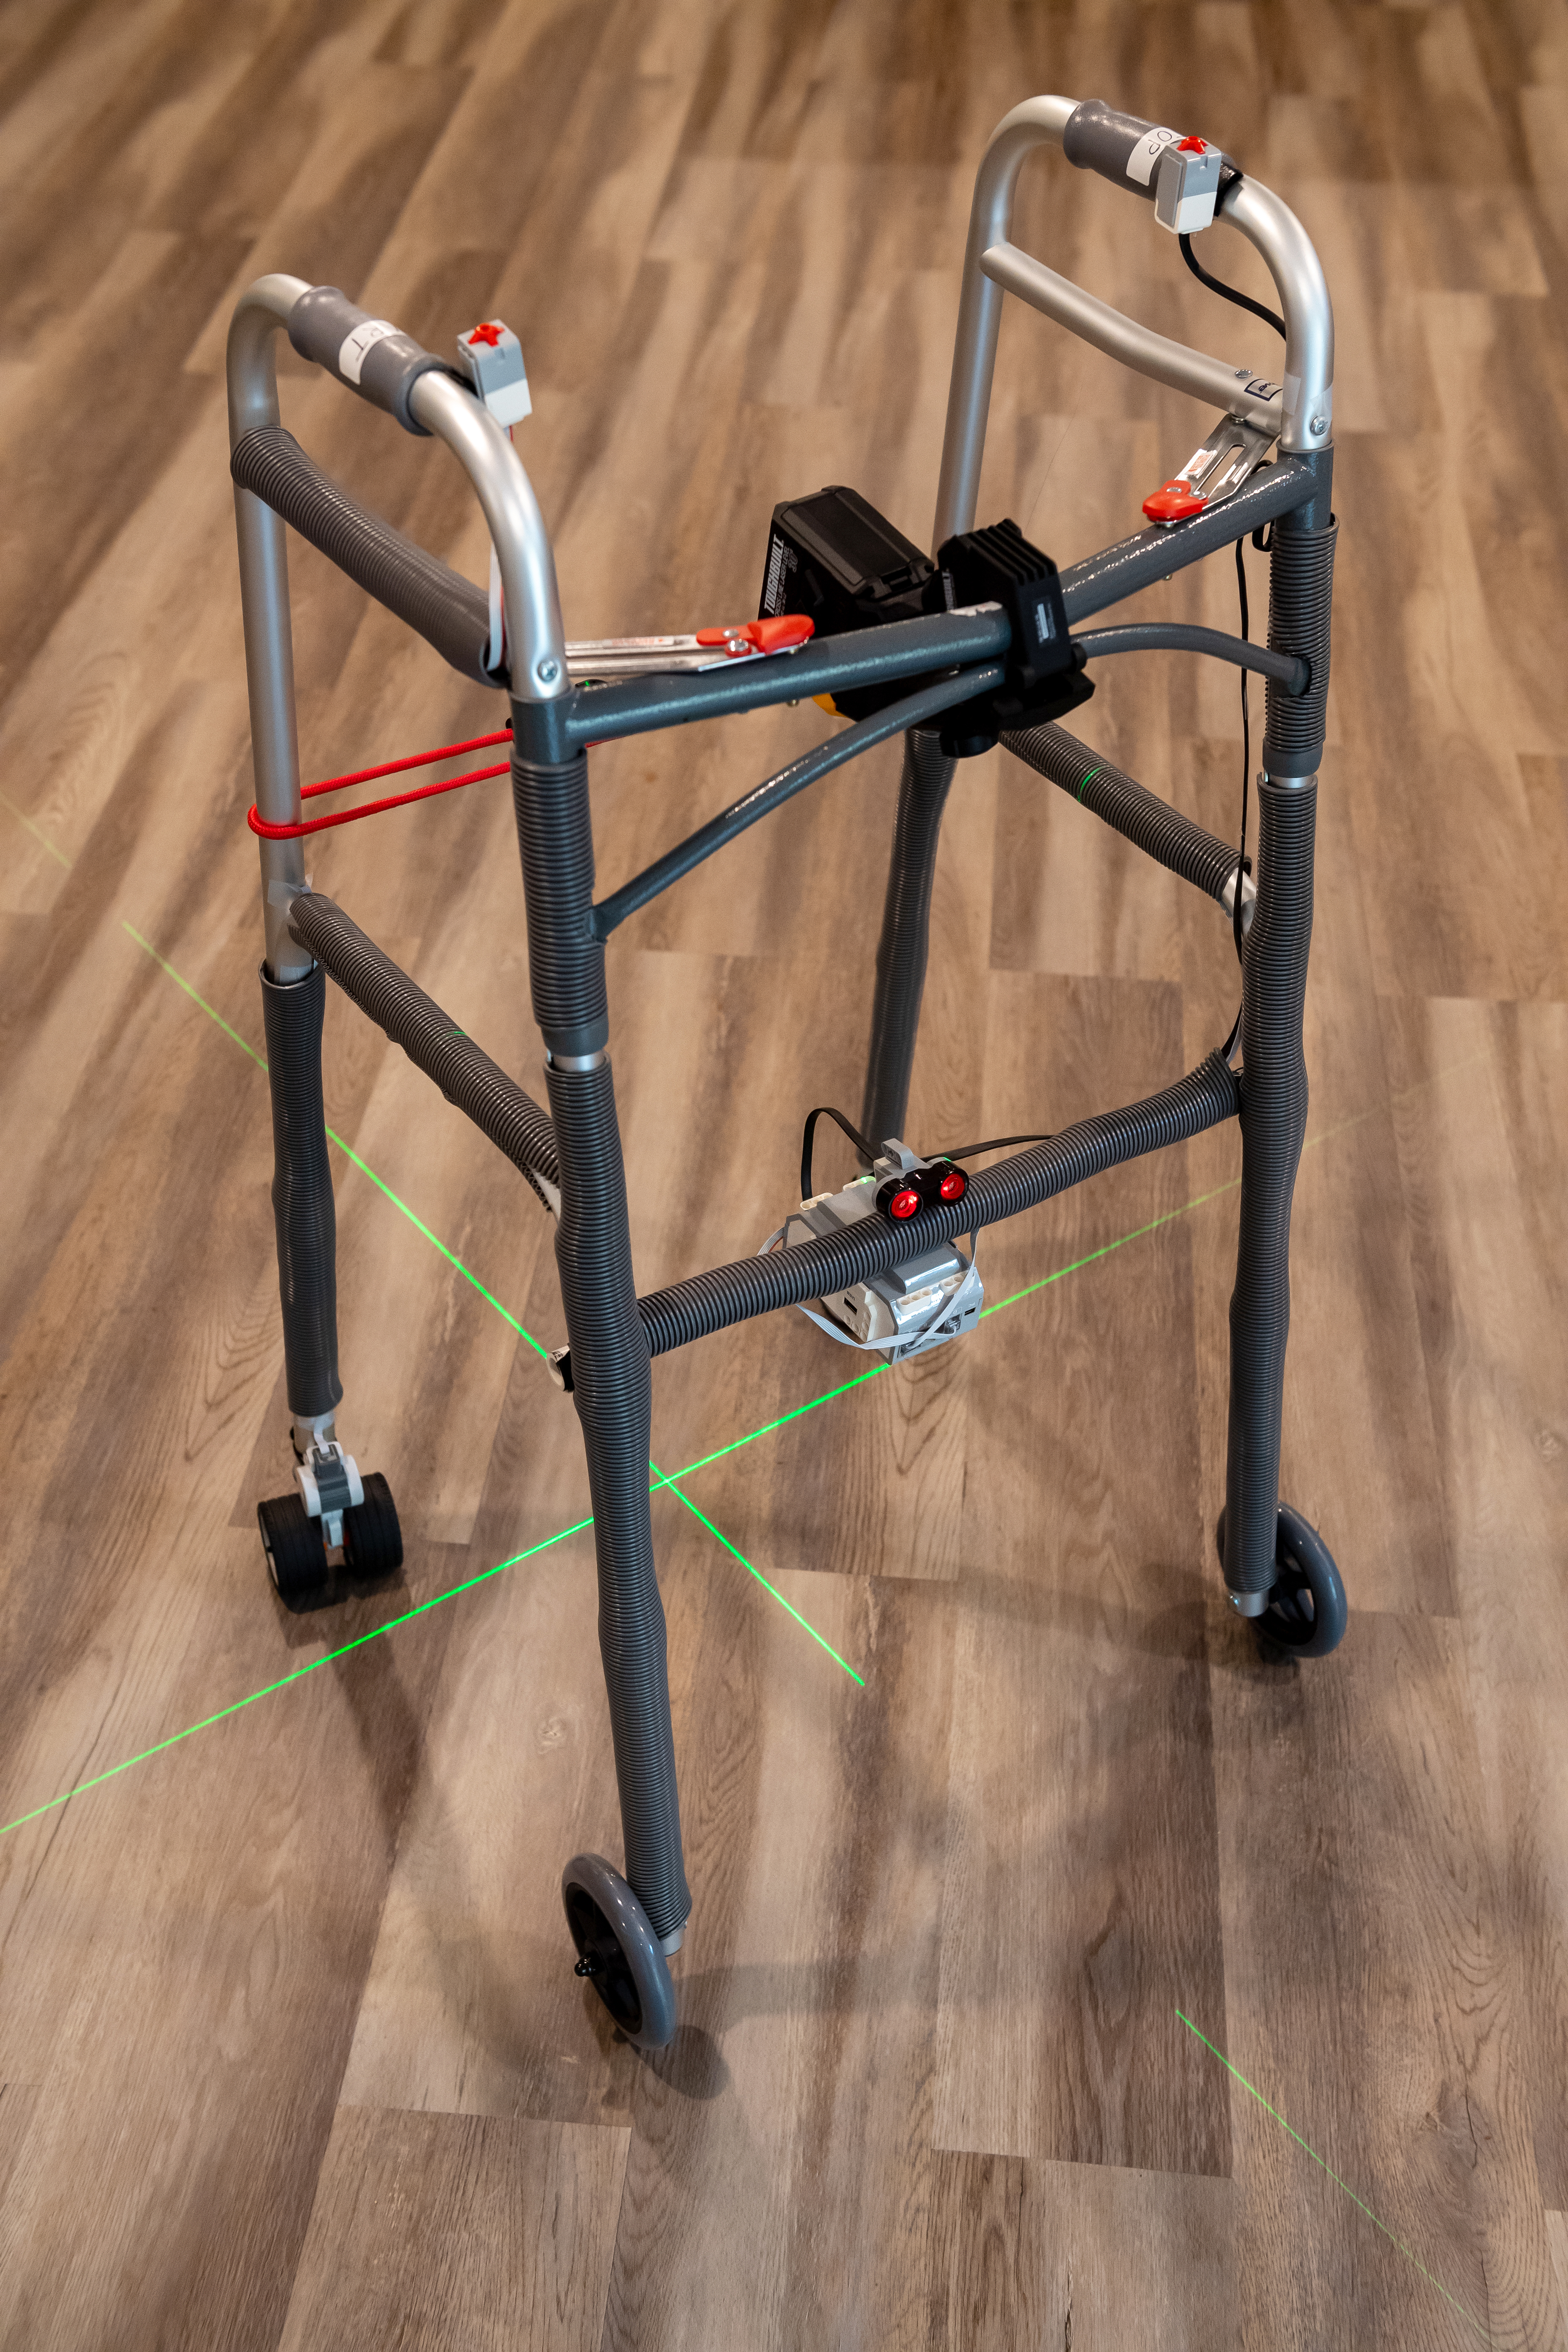 A close-up view of AutoTrem, the walker designed by two Chantilly High School students to assist people with mobility issues.